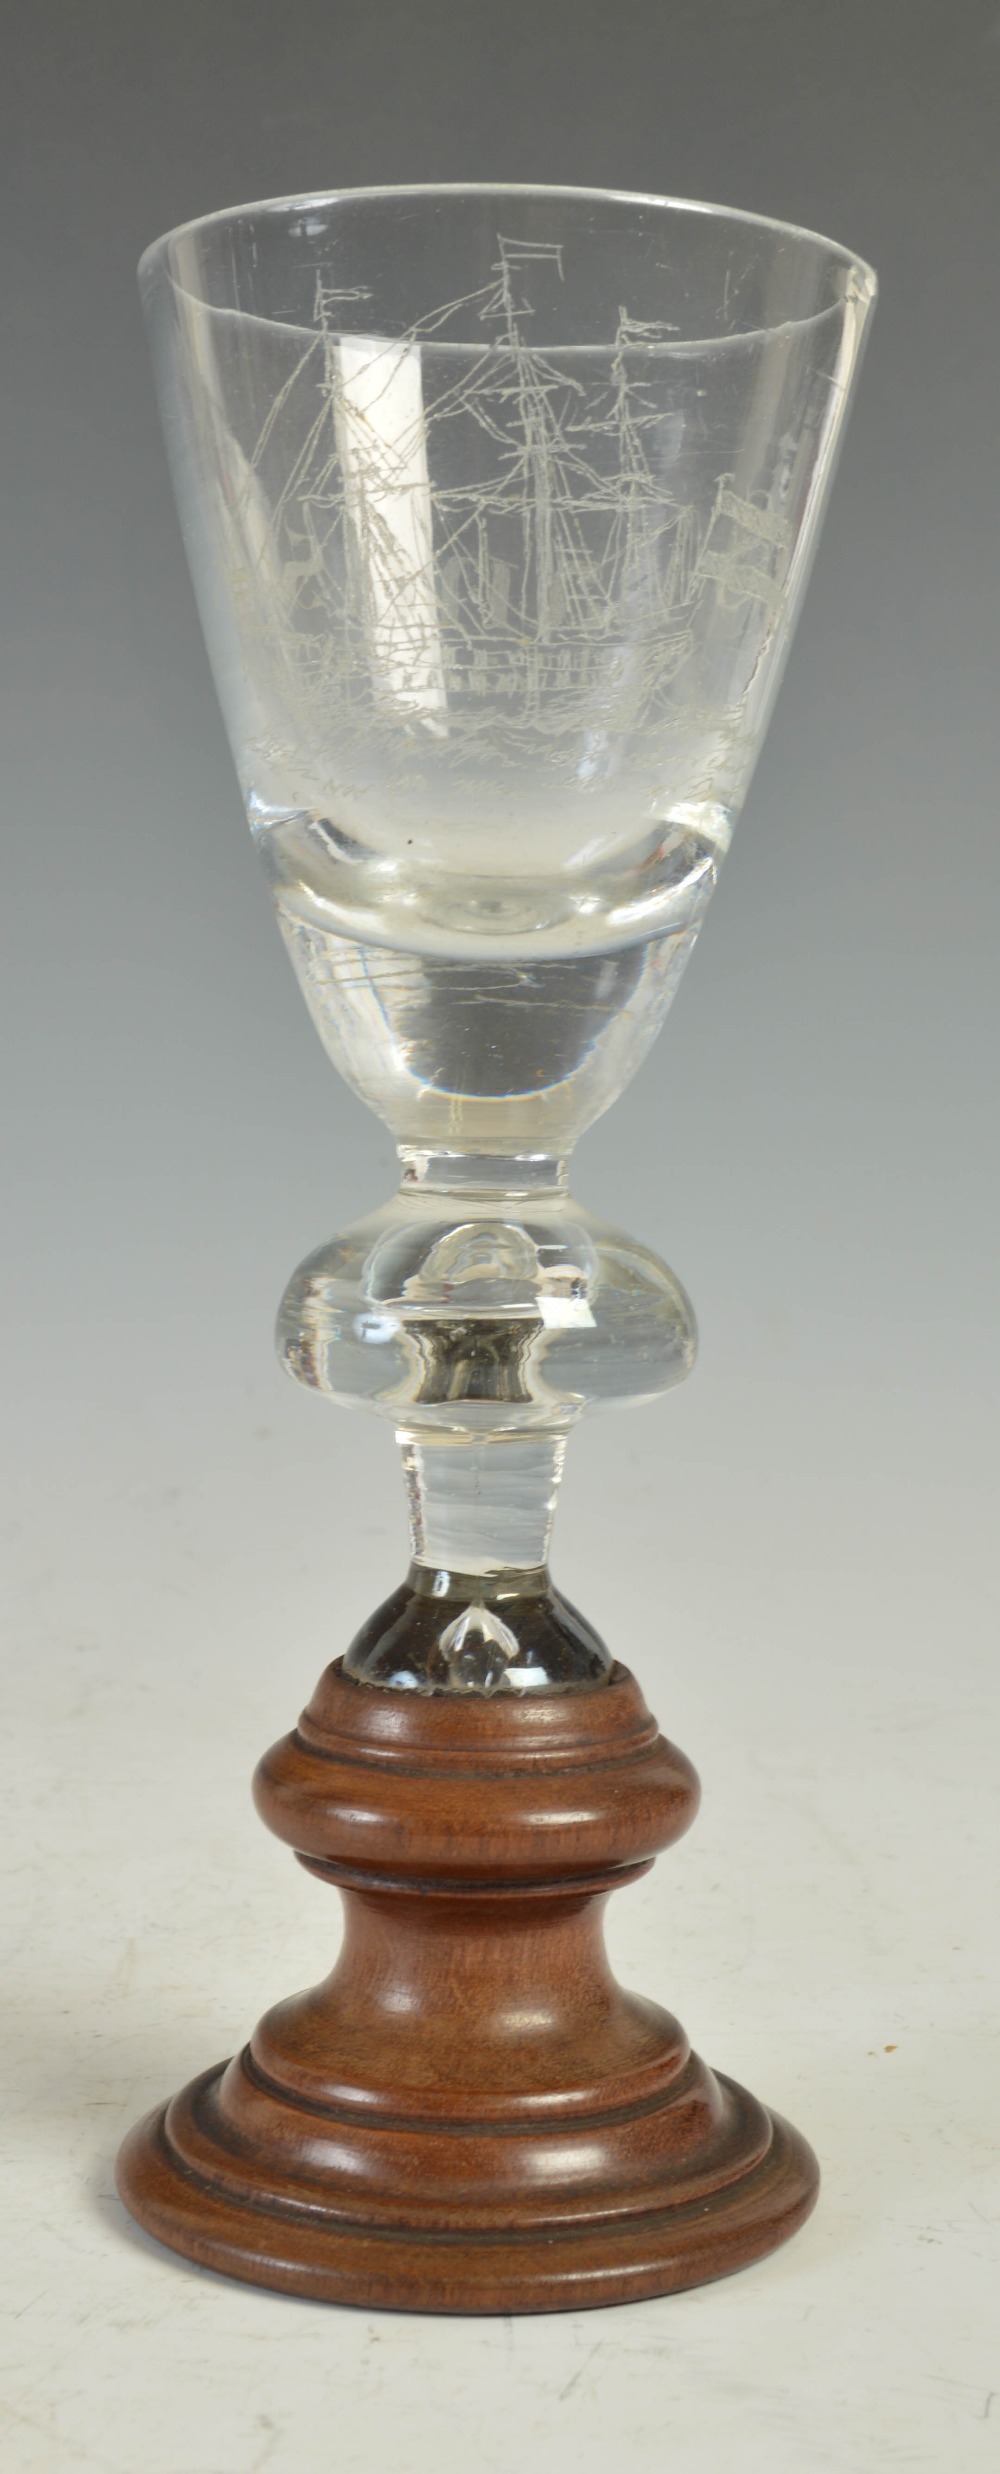 An 18th century Dutch wine glass or goblet, the conical shaped bowl with scratched/ engraved